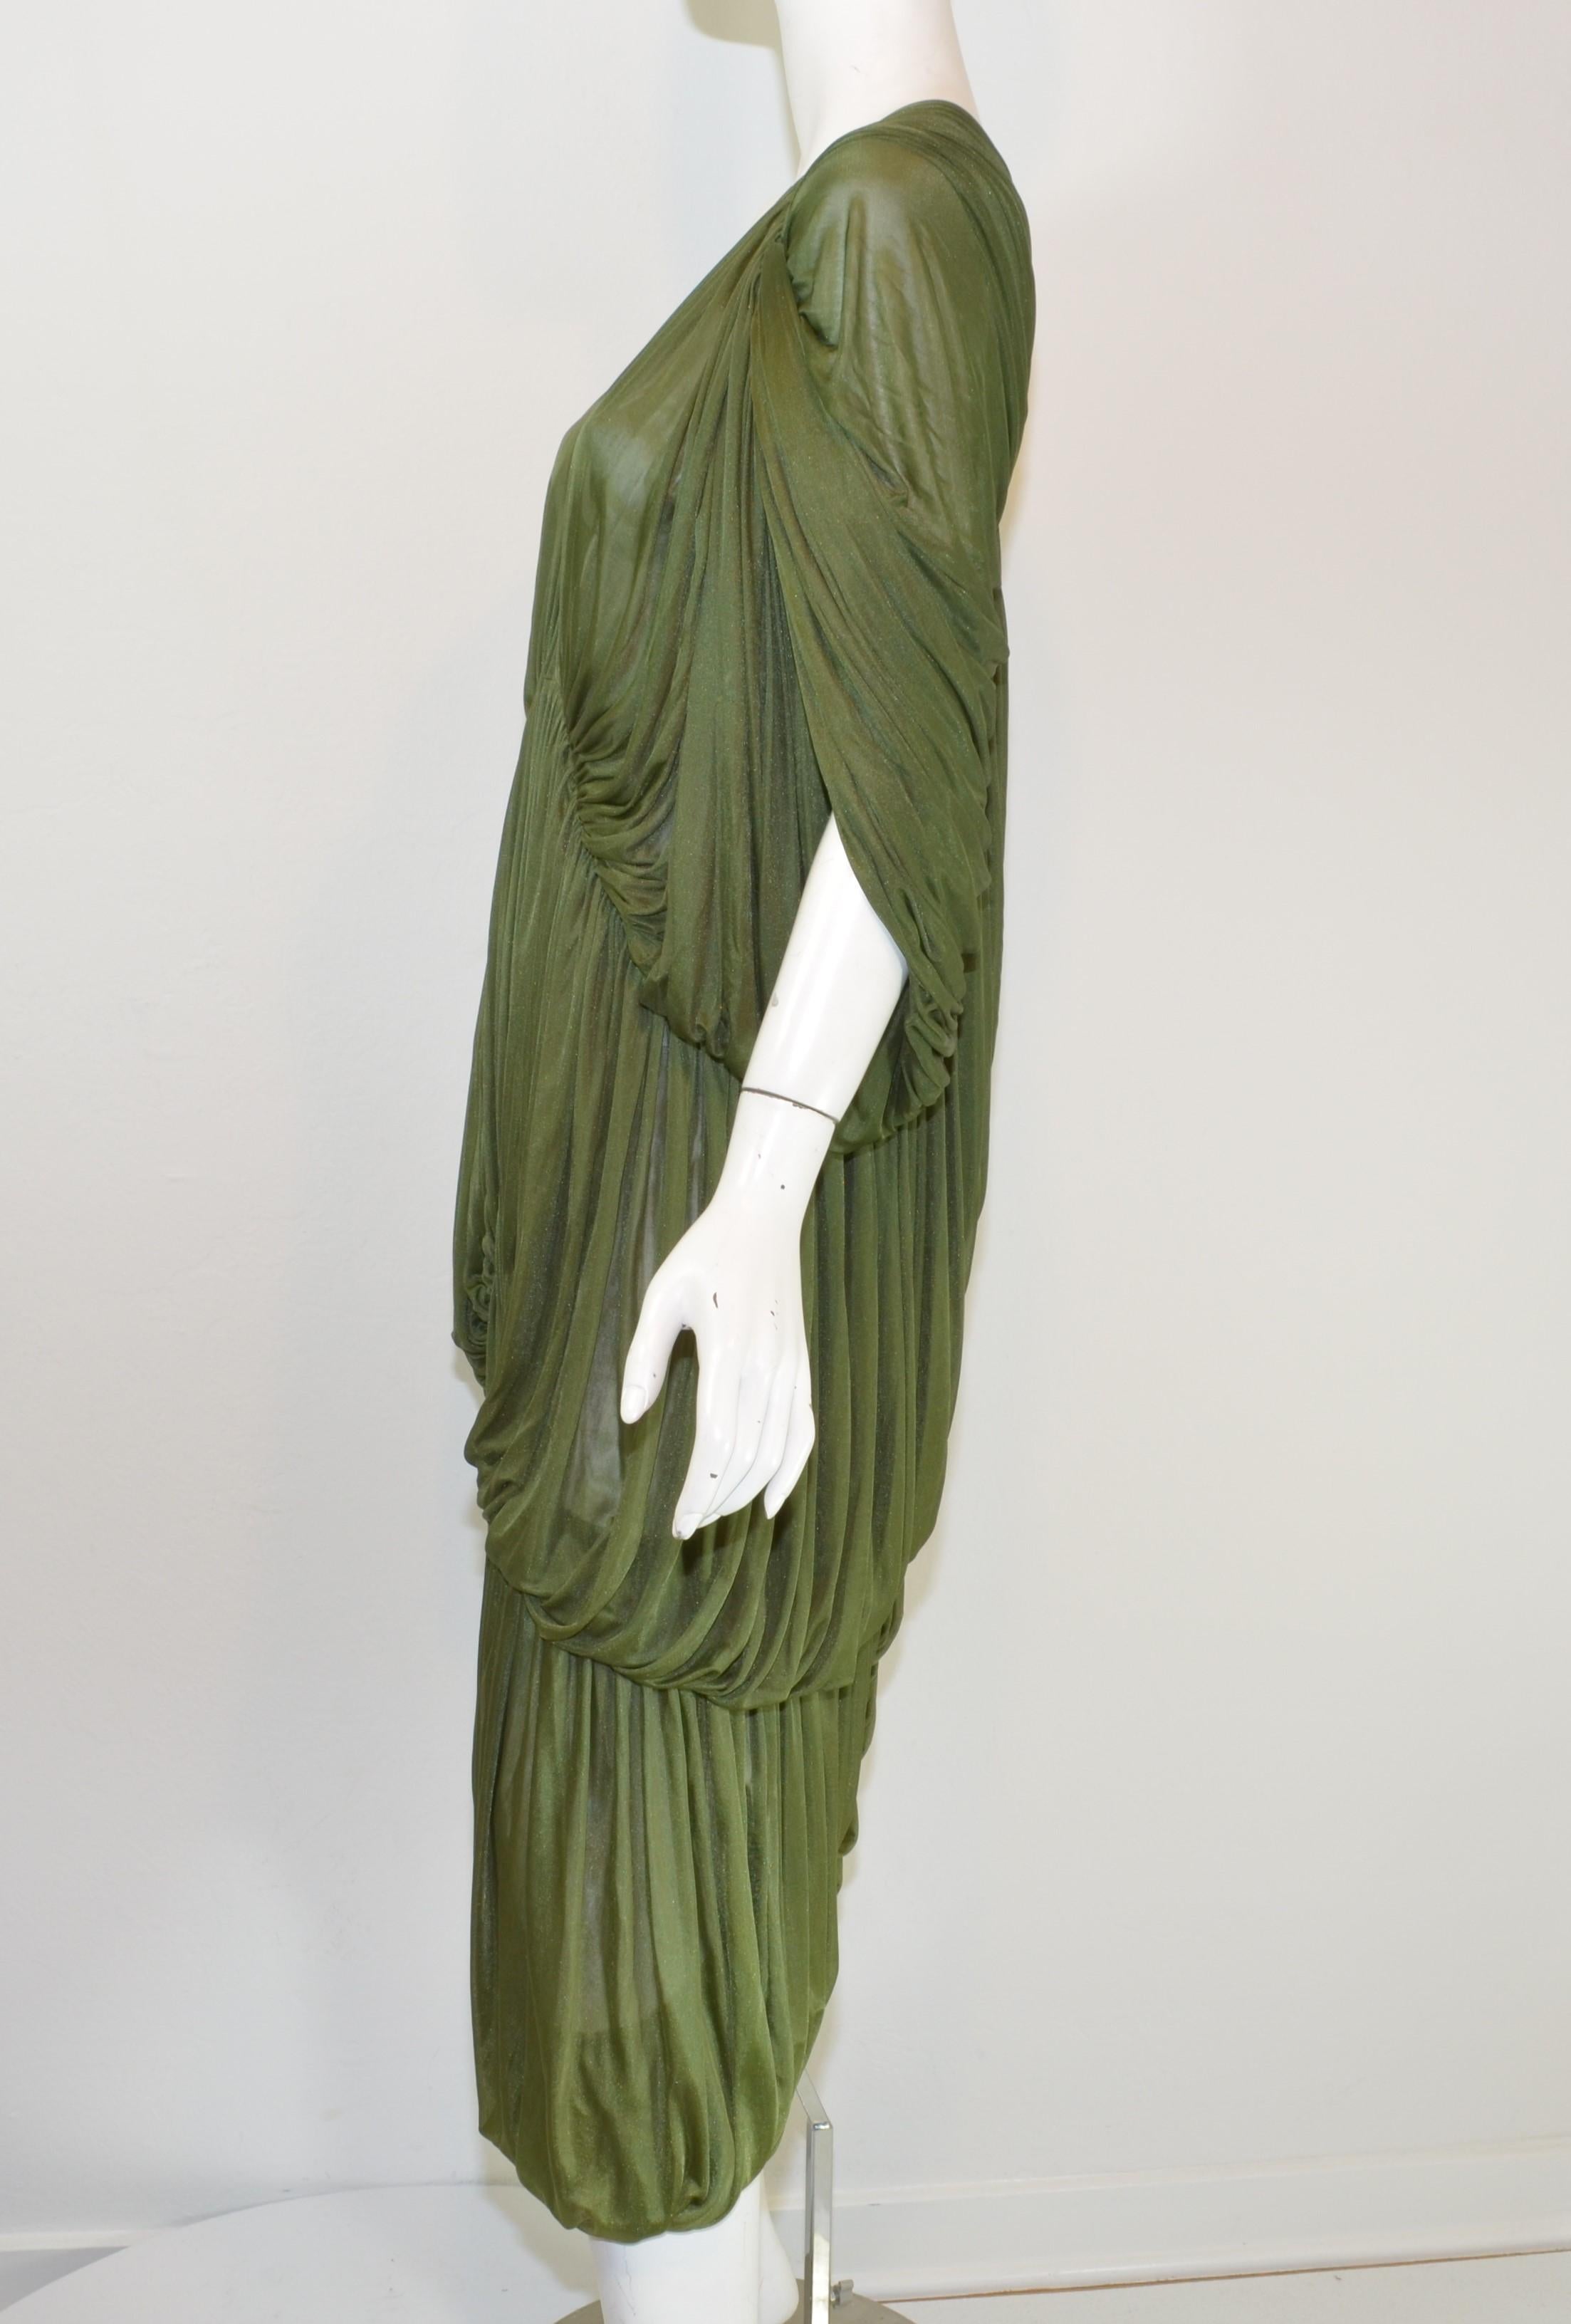 Norma Kamali OMO dress is featured in a olive green composed with a jersey fabric with hook-and-eye fastenings along the center and a ruched design throughout. Dress is in great condition with normal but light wears.